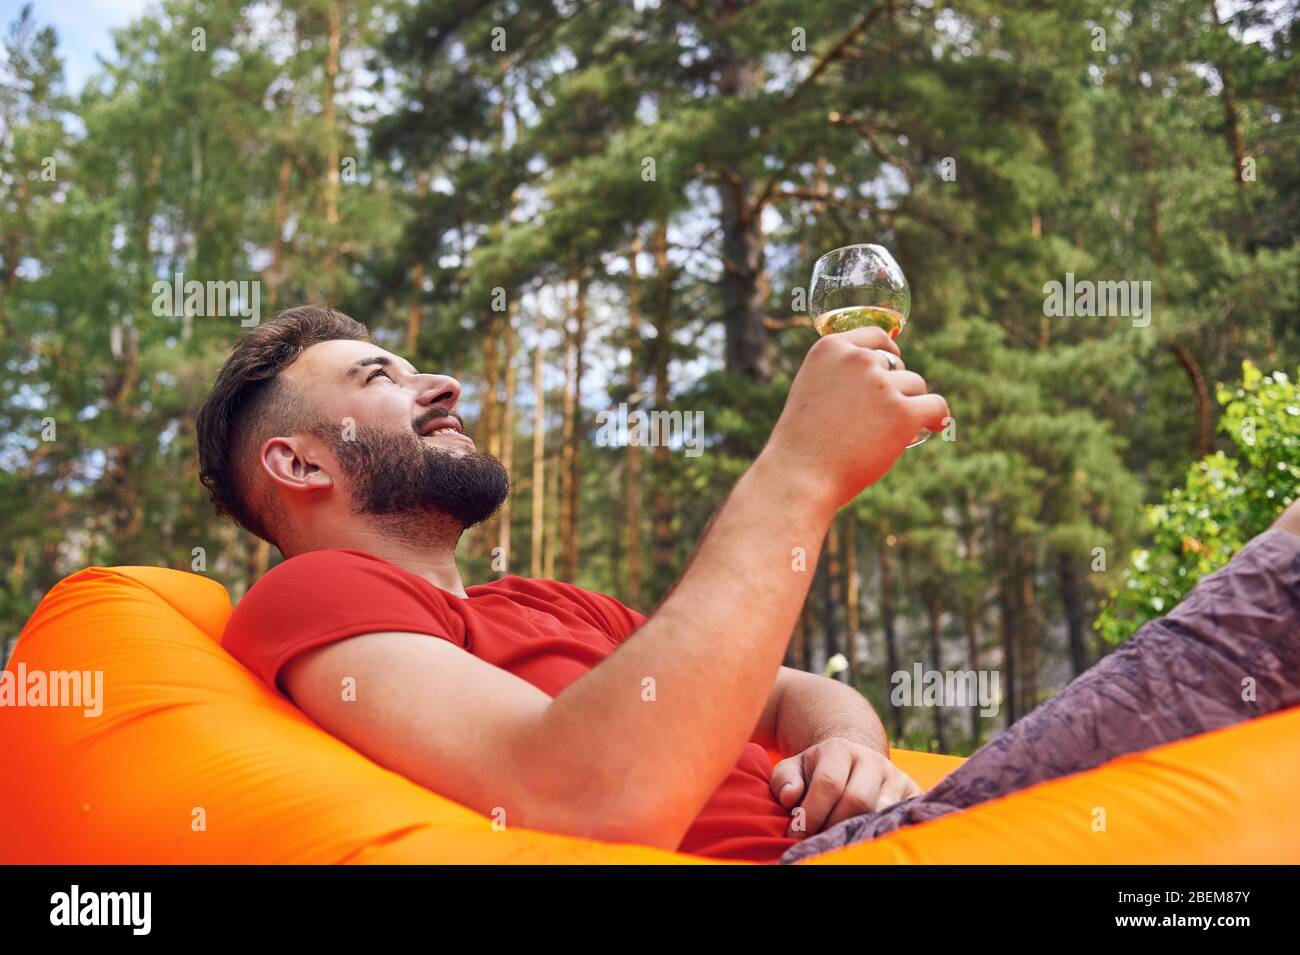 Enjoying life. A young man lies in a bivouac in the forest., relaxation, vacations, lifestyle concept Stock Photo